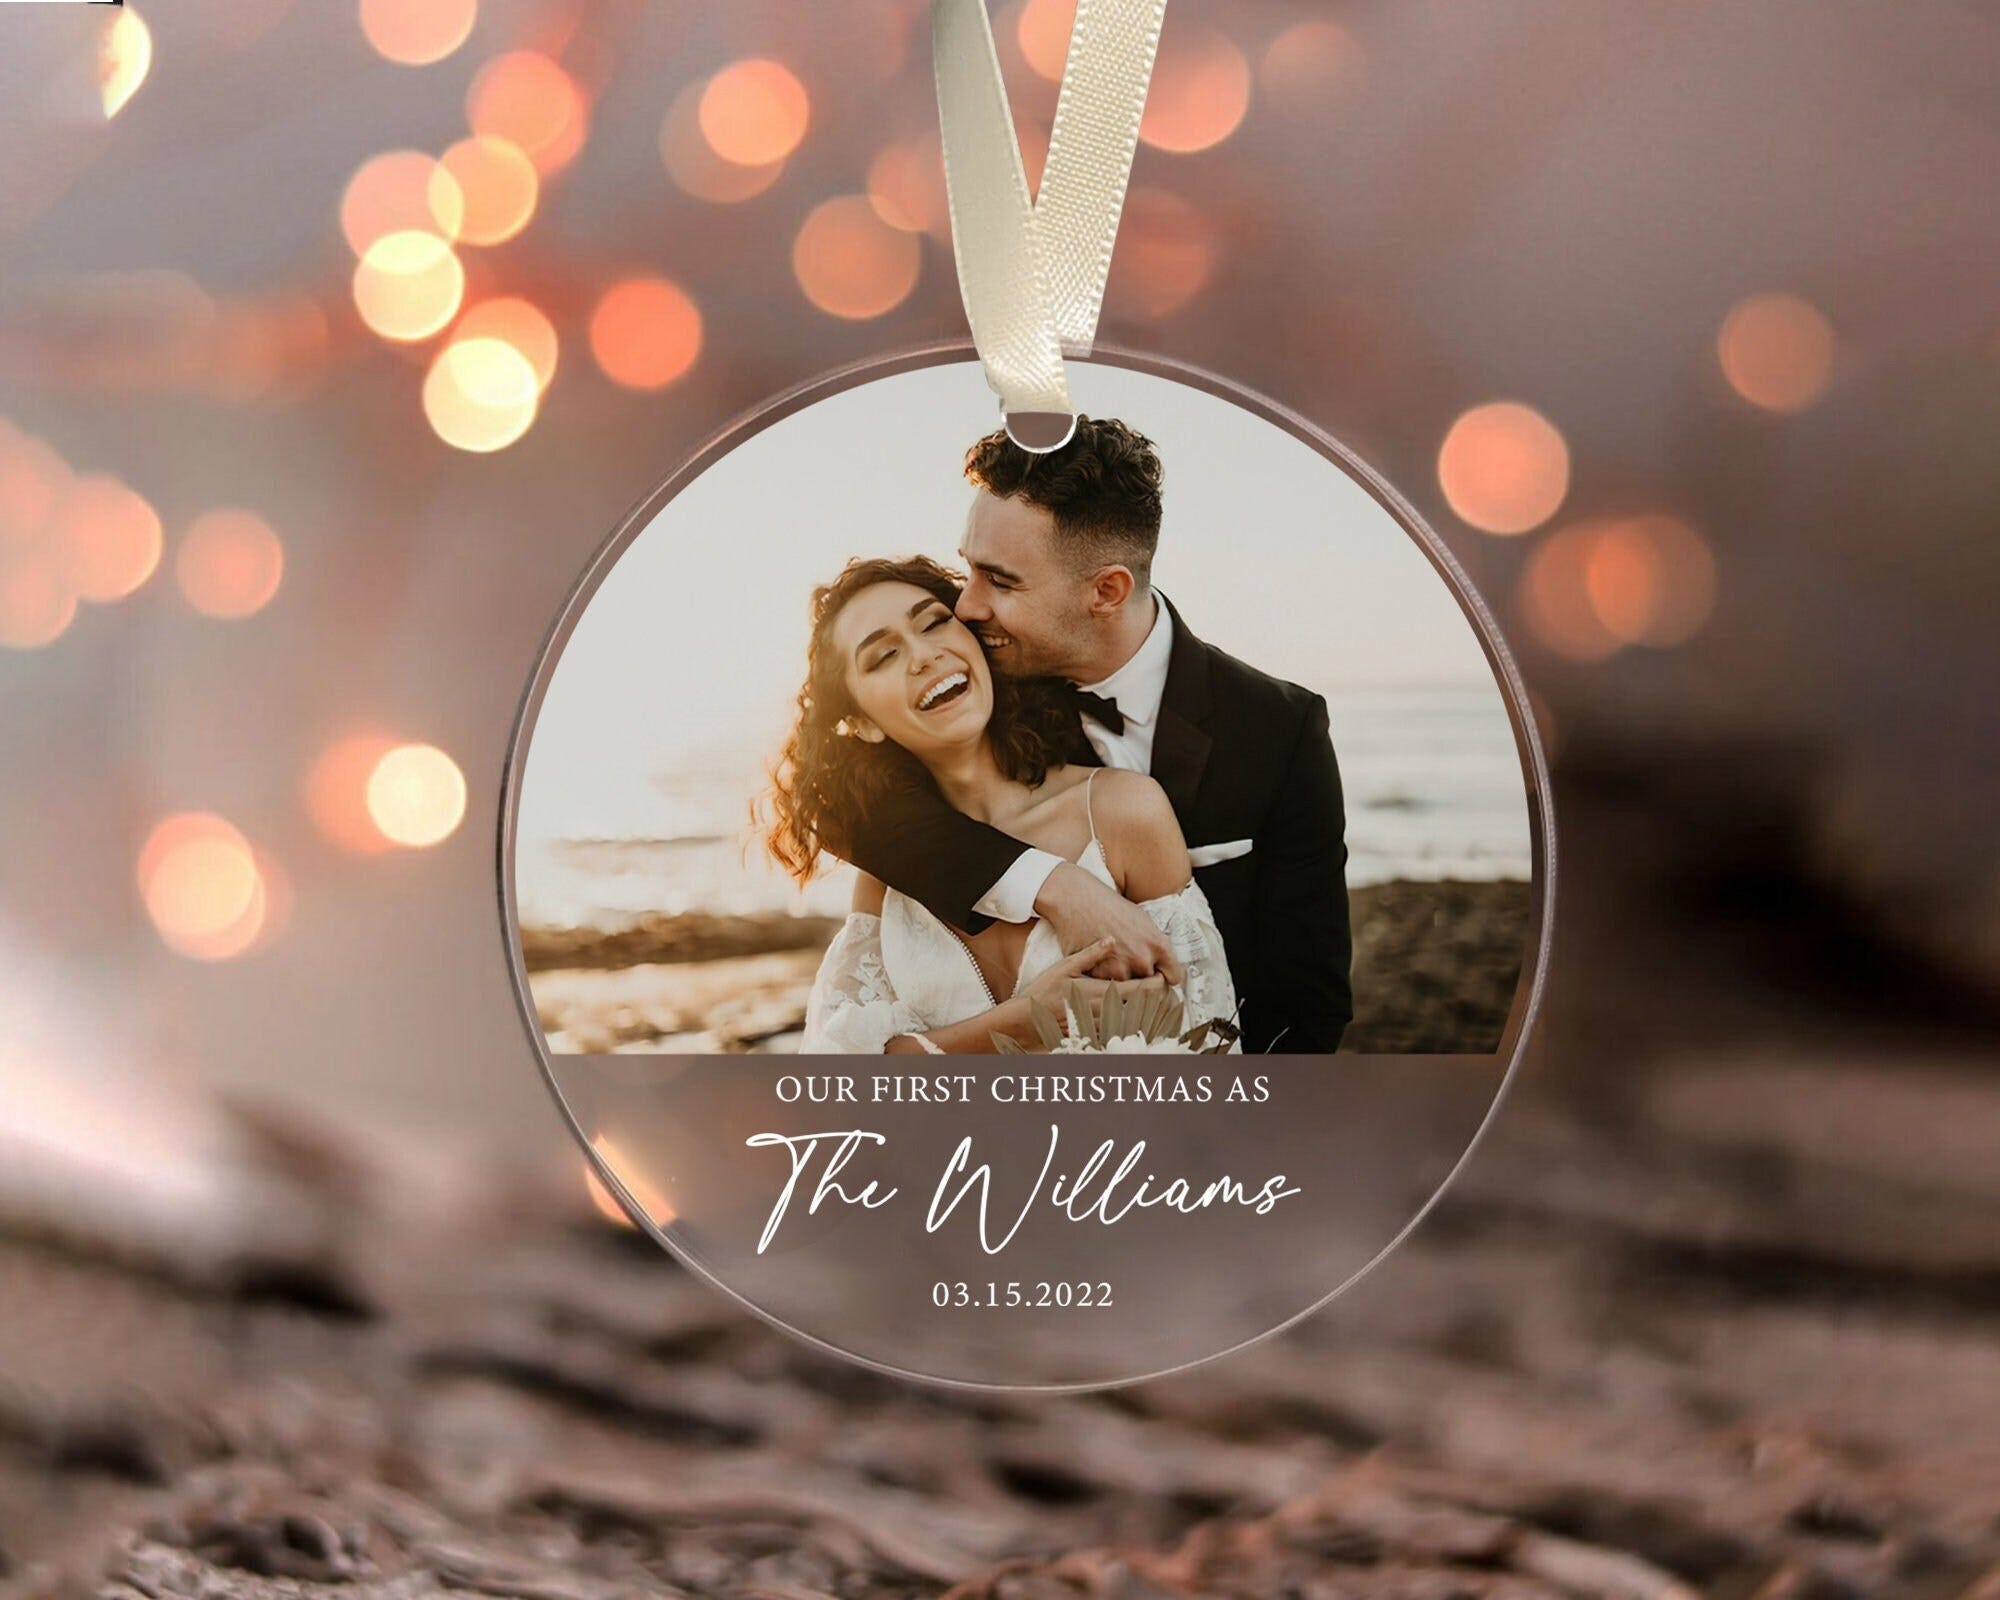 Our First Christmas Married Ornament 2022, Custom Photo Ornament, Christmas Ornaments Personalized, Newlywed Gifts, Mr & Mrs Ornament